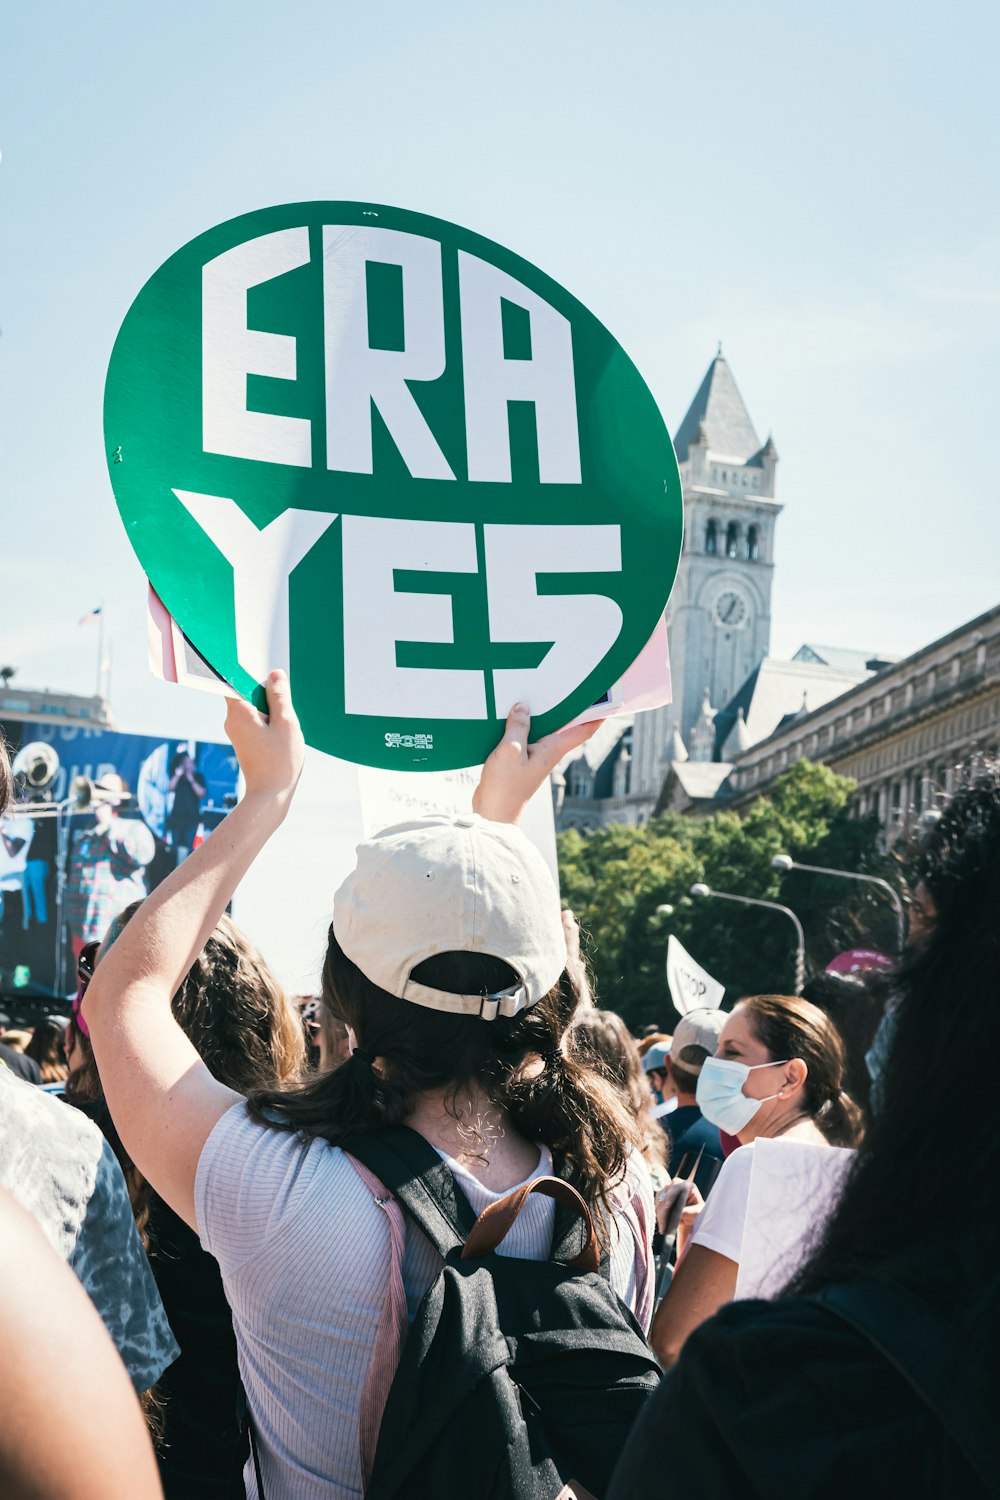 a group of people holding up a sign that says err yes